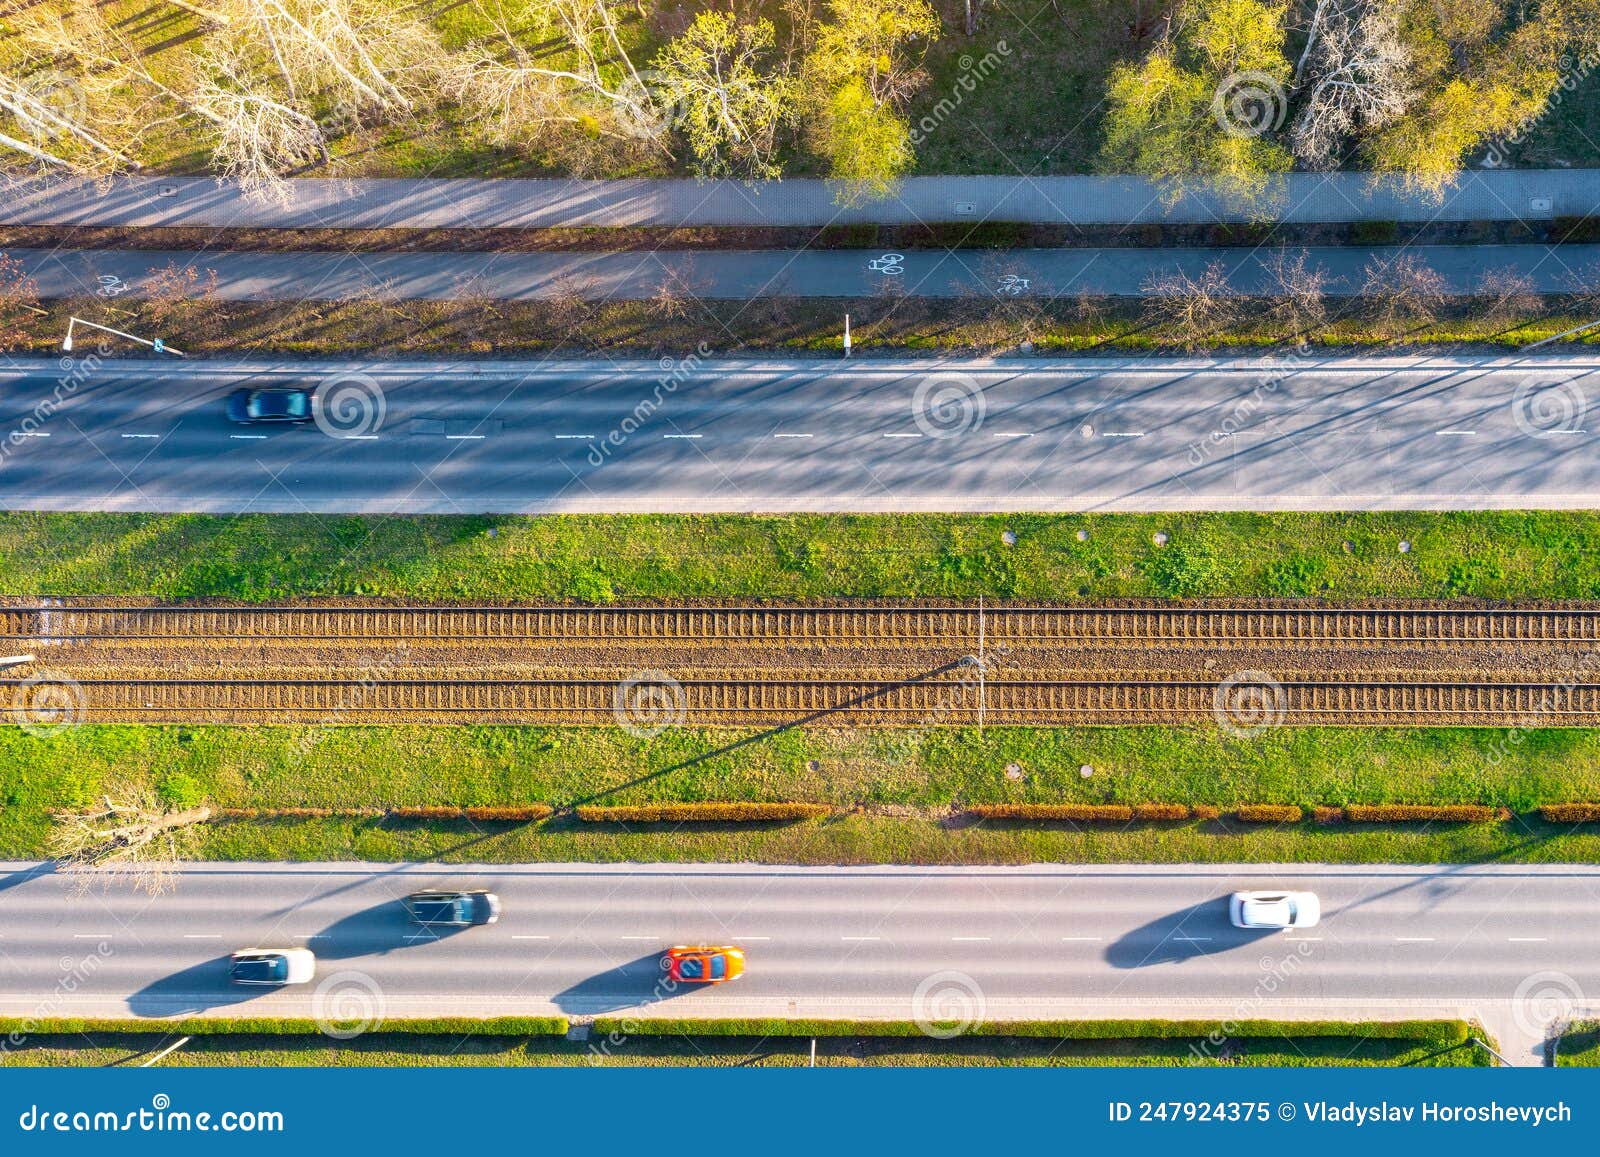 aerial view of city traffic, trams and cars in wroclaw city, poland